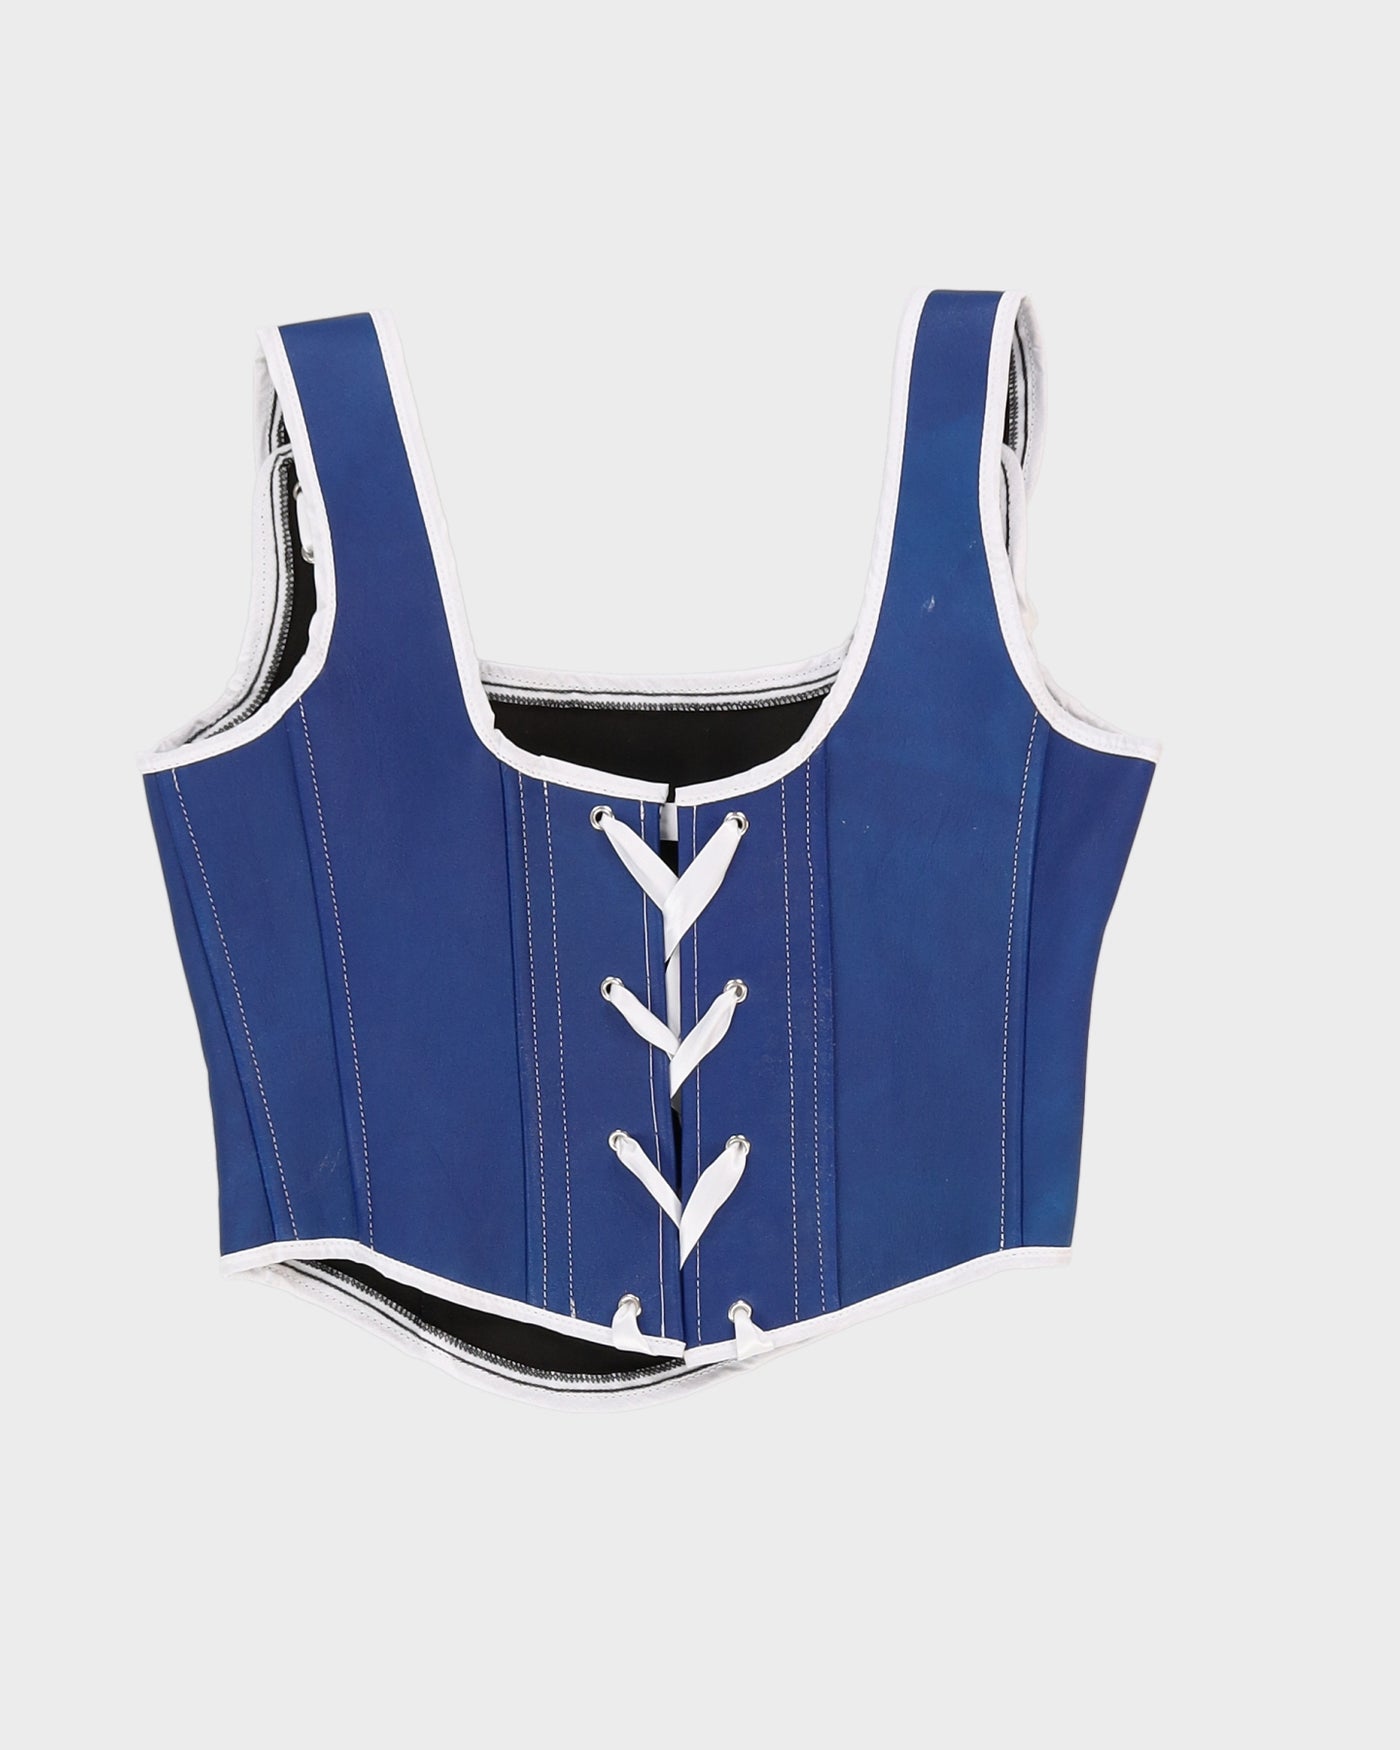 Rokit Originals Recycled Textile Blue Leather Astrid Corset Top - One Size